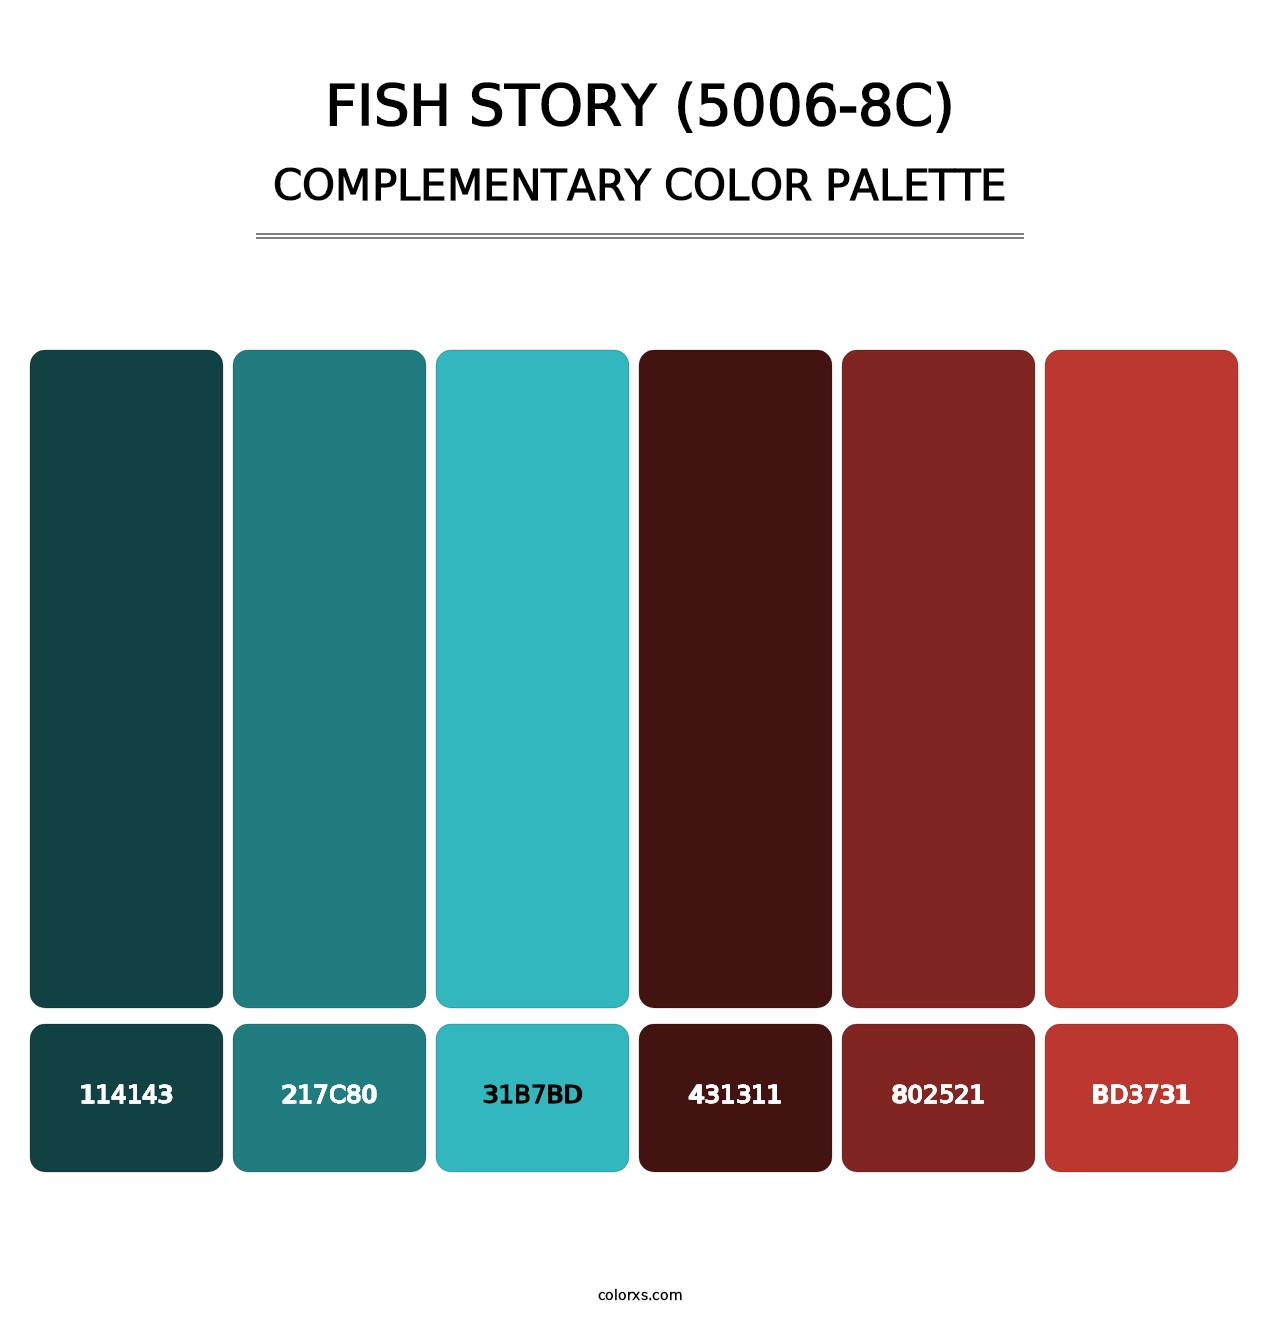 Fish Story (5006-8C) - Complementary Color Palette